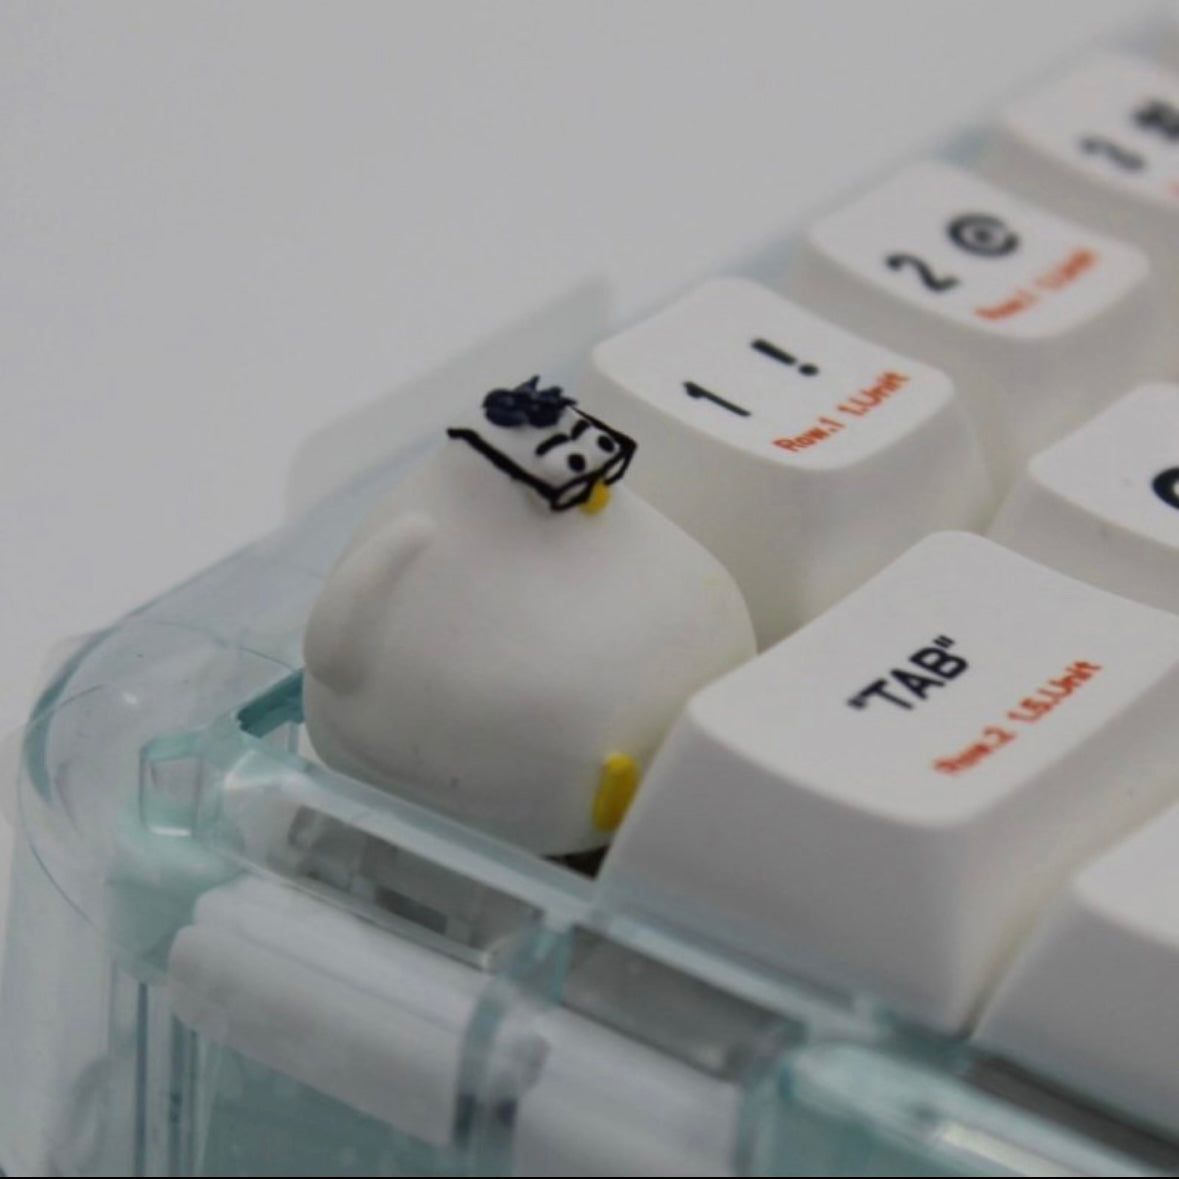 Chubby Seagull Custom Artisan Keycaps with Glasses a little bulky, but cute